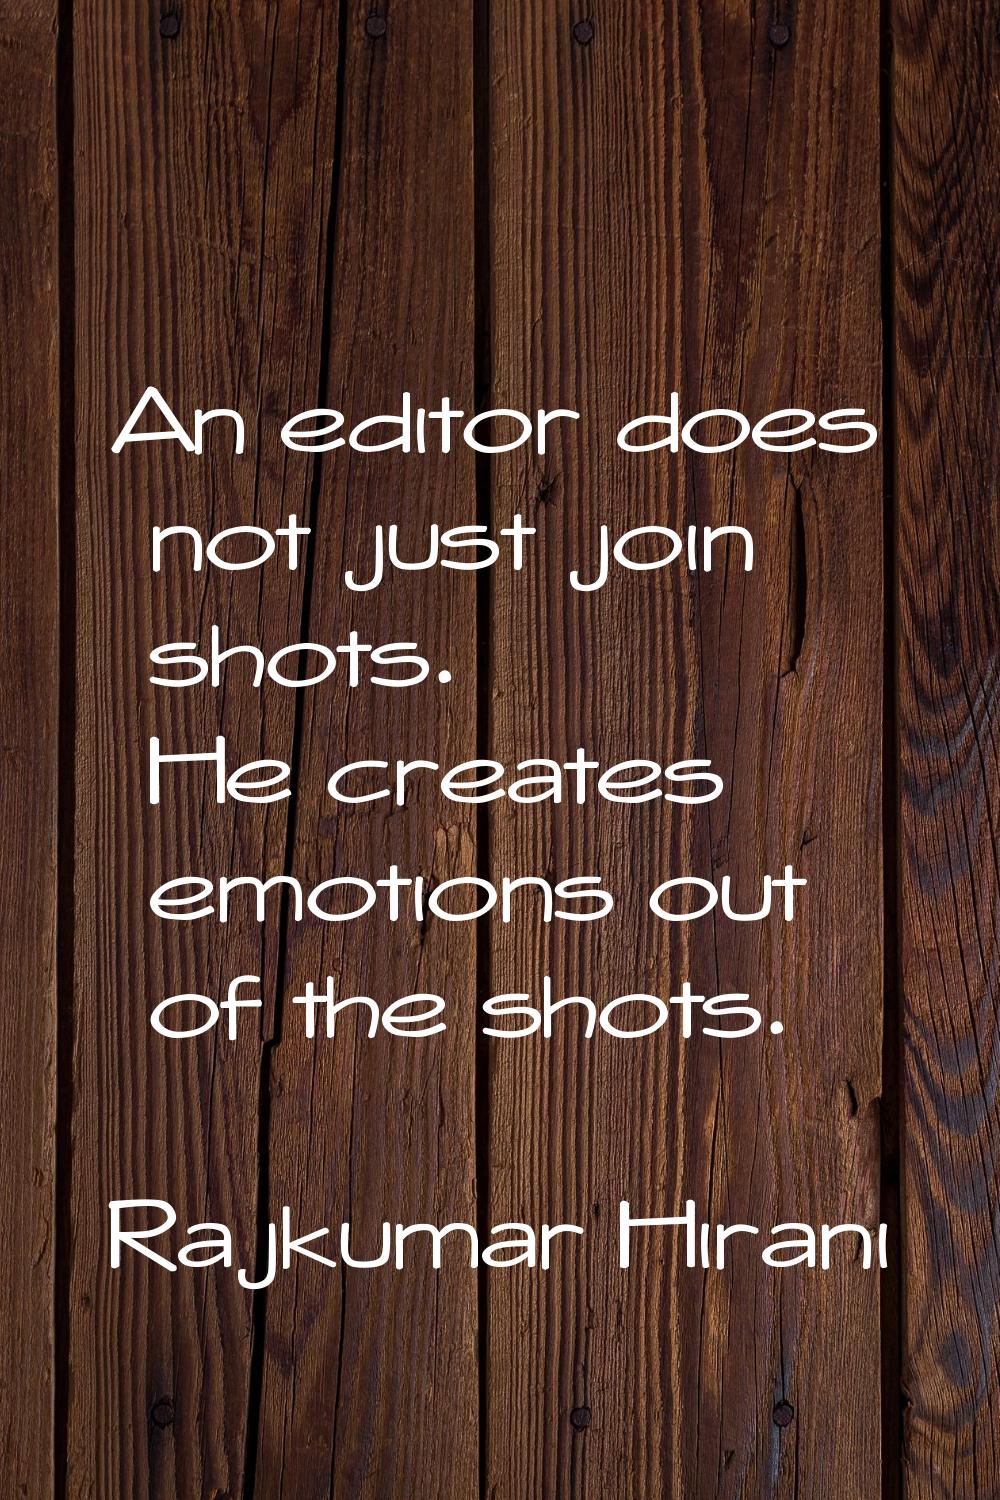 An editor does not just join shots. He creates emotions out of the shots.